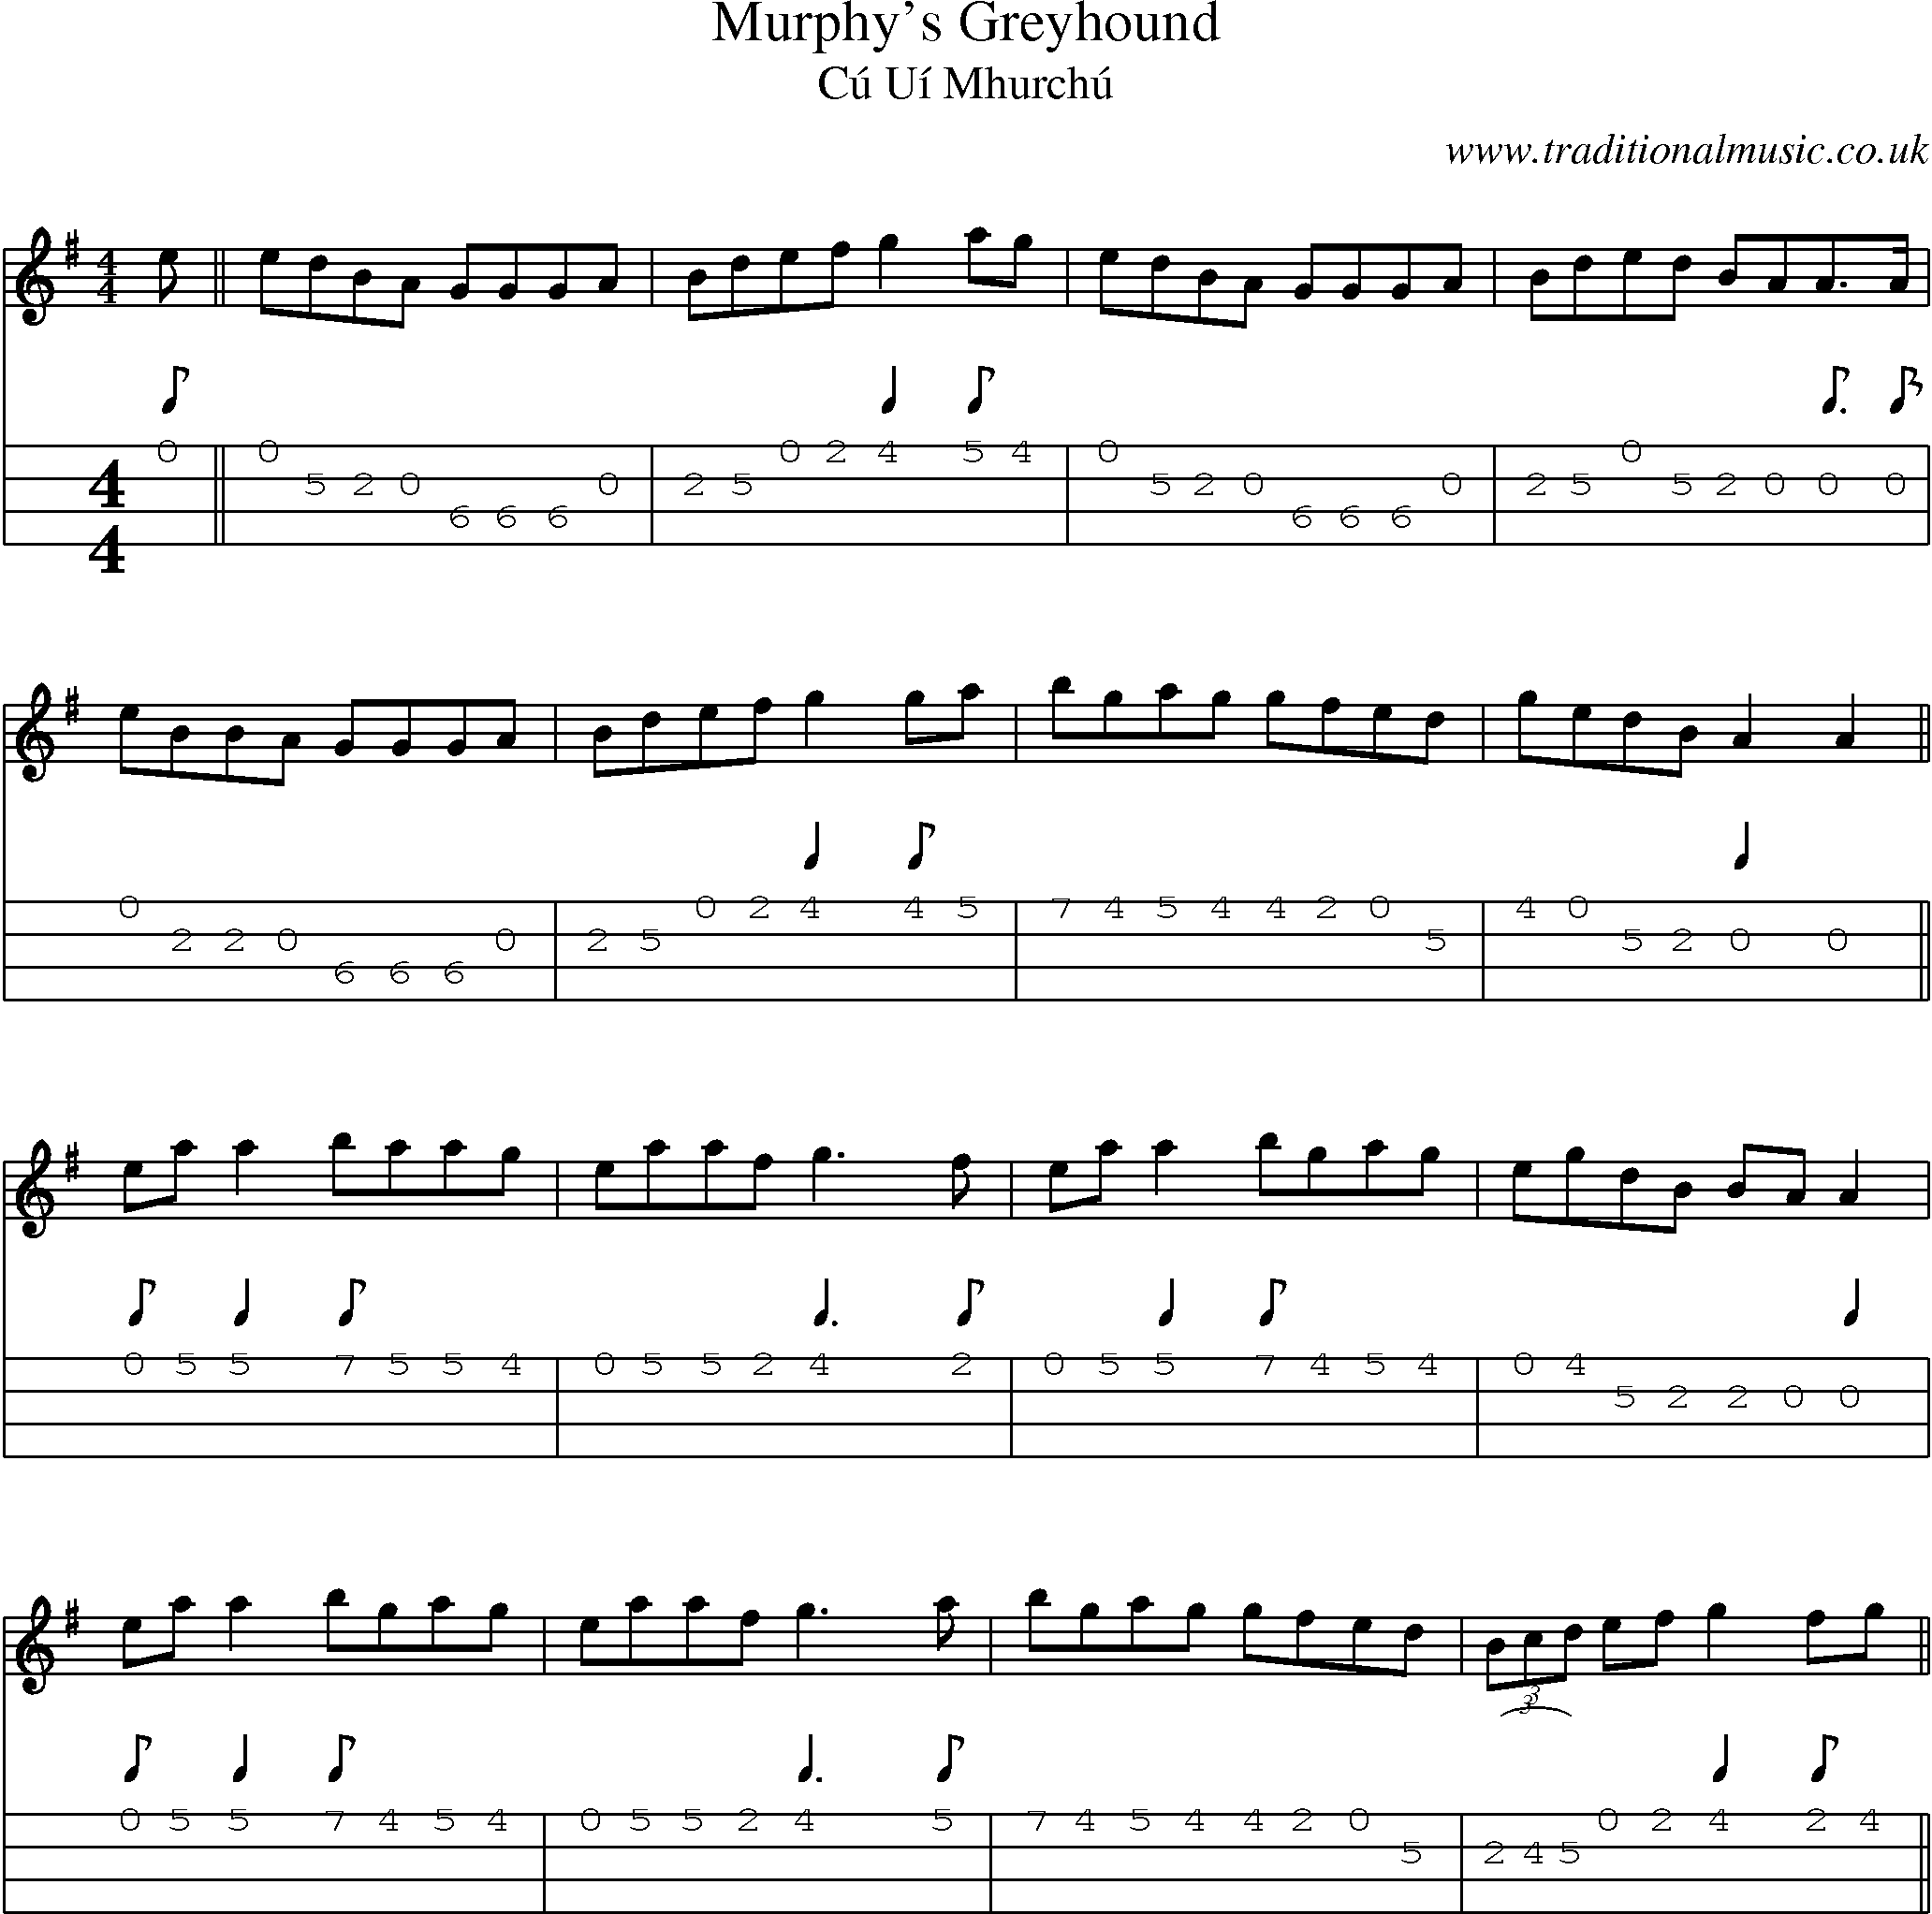 Music Score and Mandolin Tabs for Murphys Greyhound